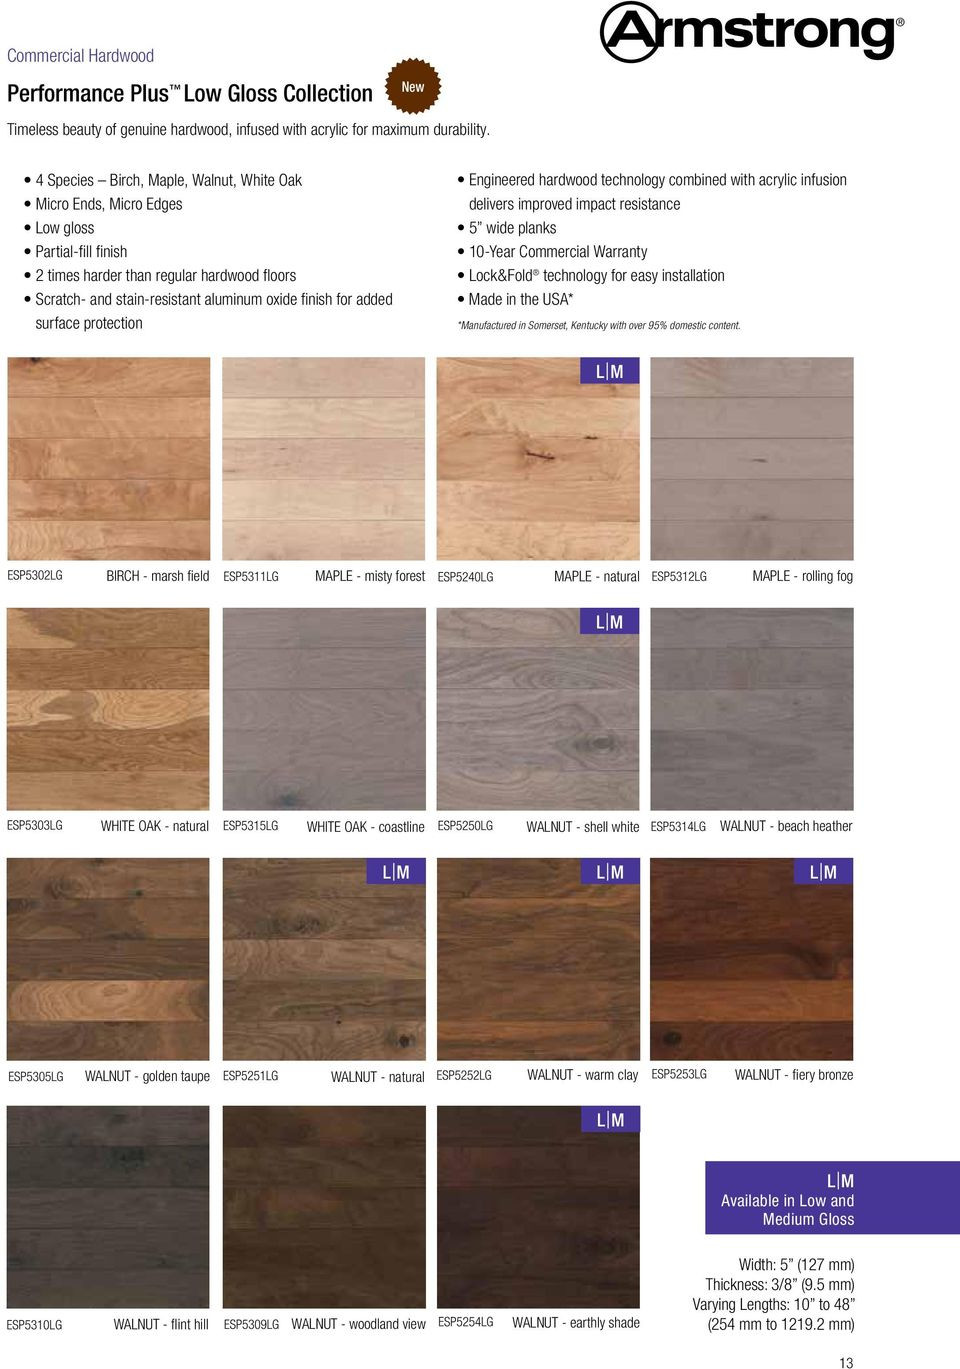 15 Famous Wood Filler for Hardwood Floor Scratches 2024 free download wood filler for hardwood floor scratches of performance plus midtown pdf throughout added surface protection engineered hardwood technology combined with acrylic infusion delivers improved i